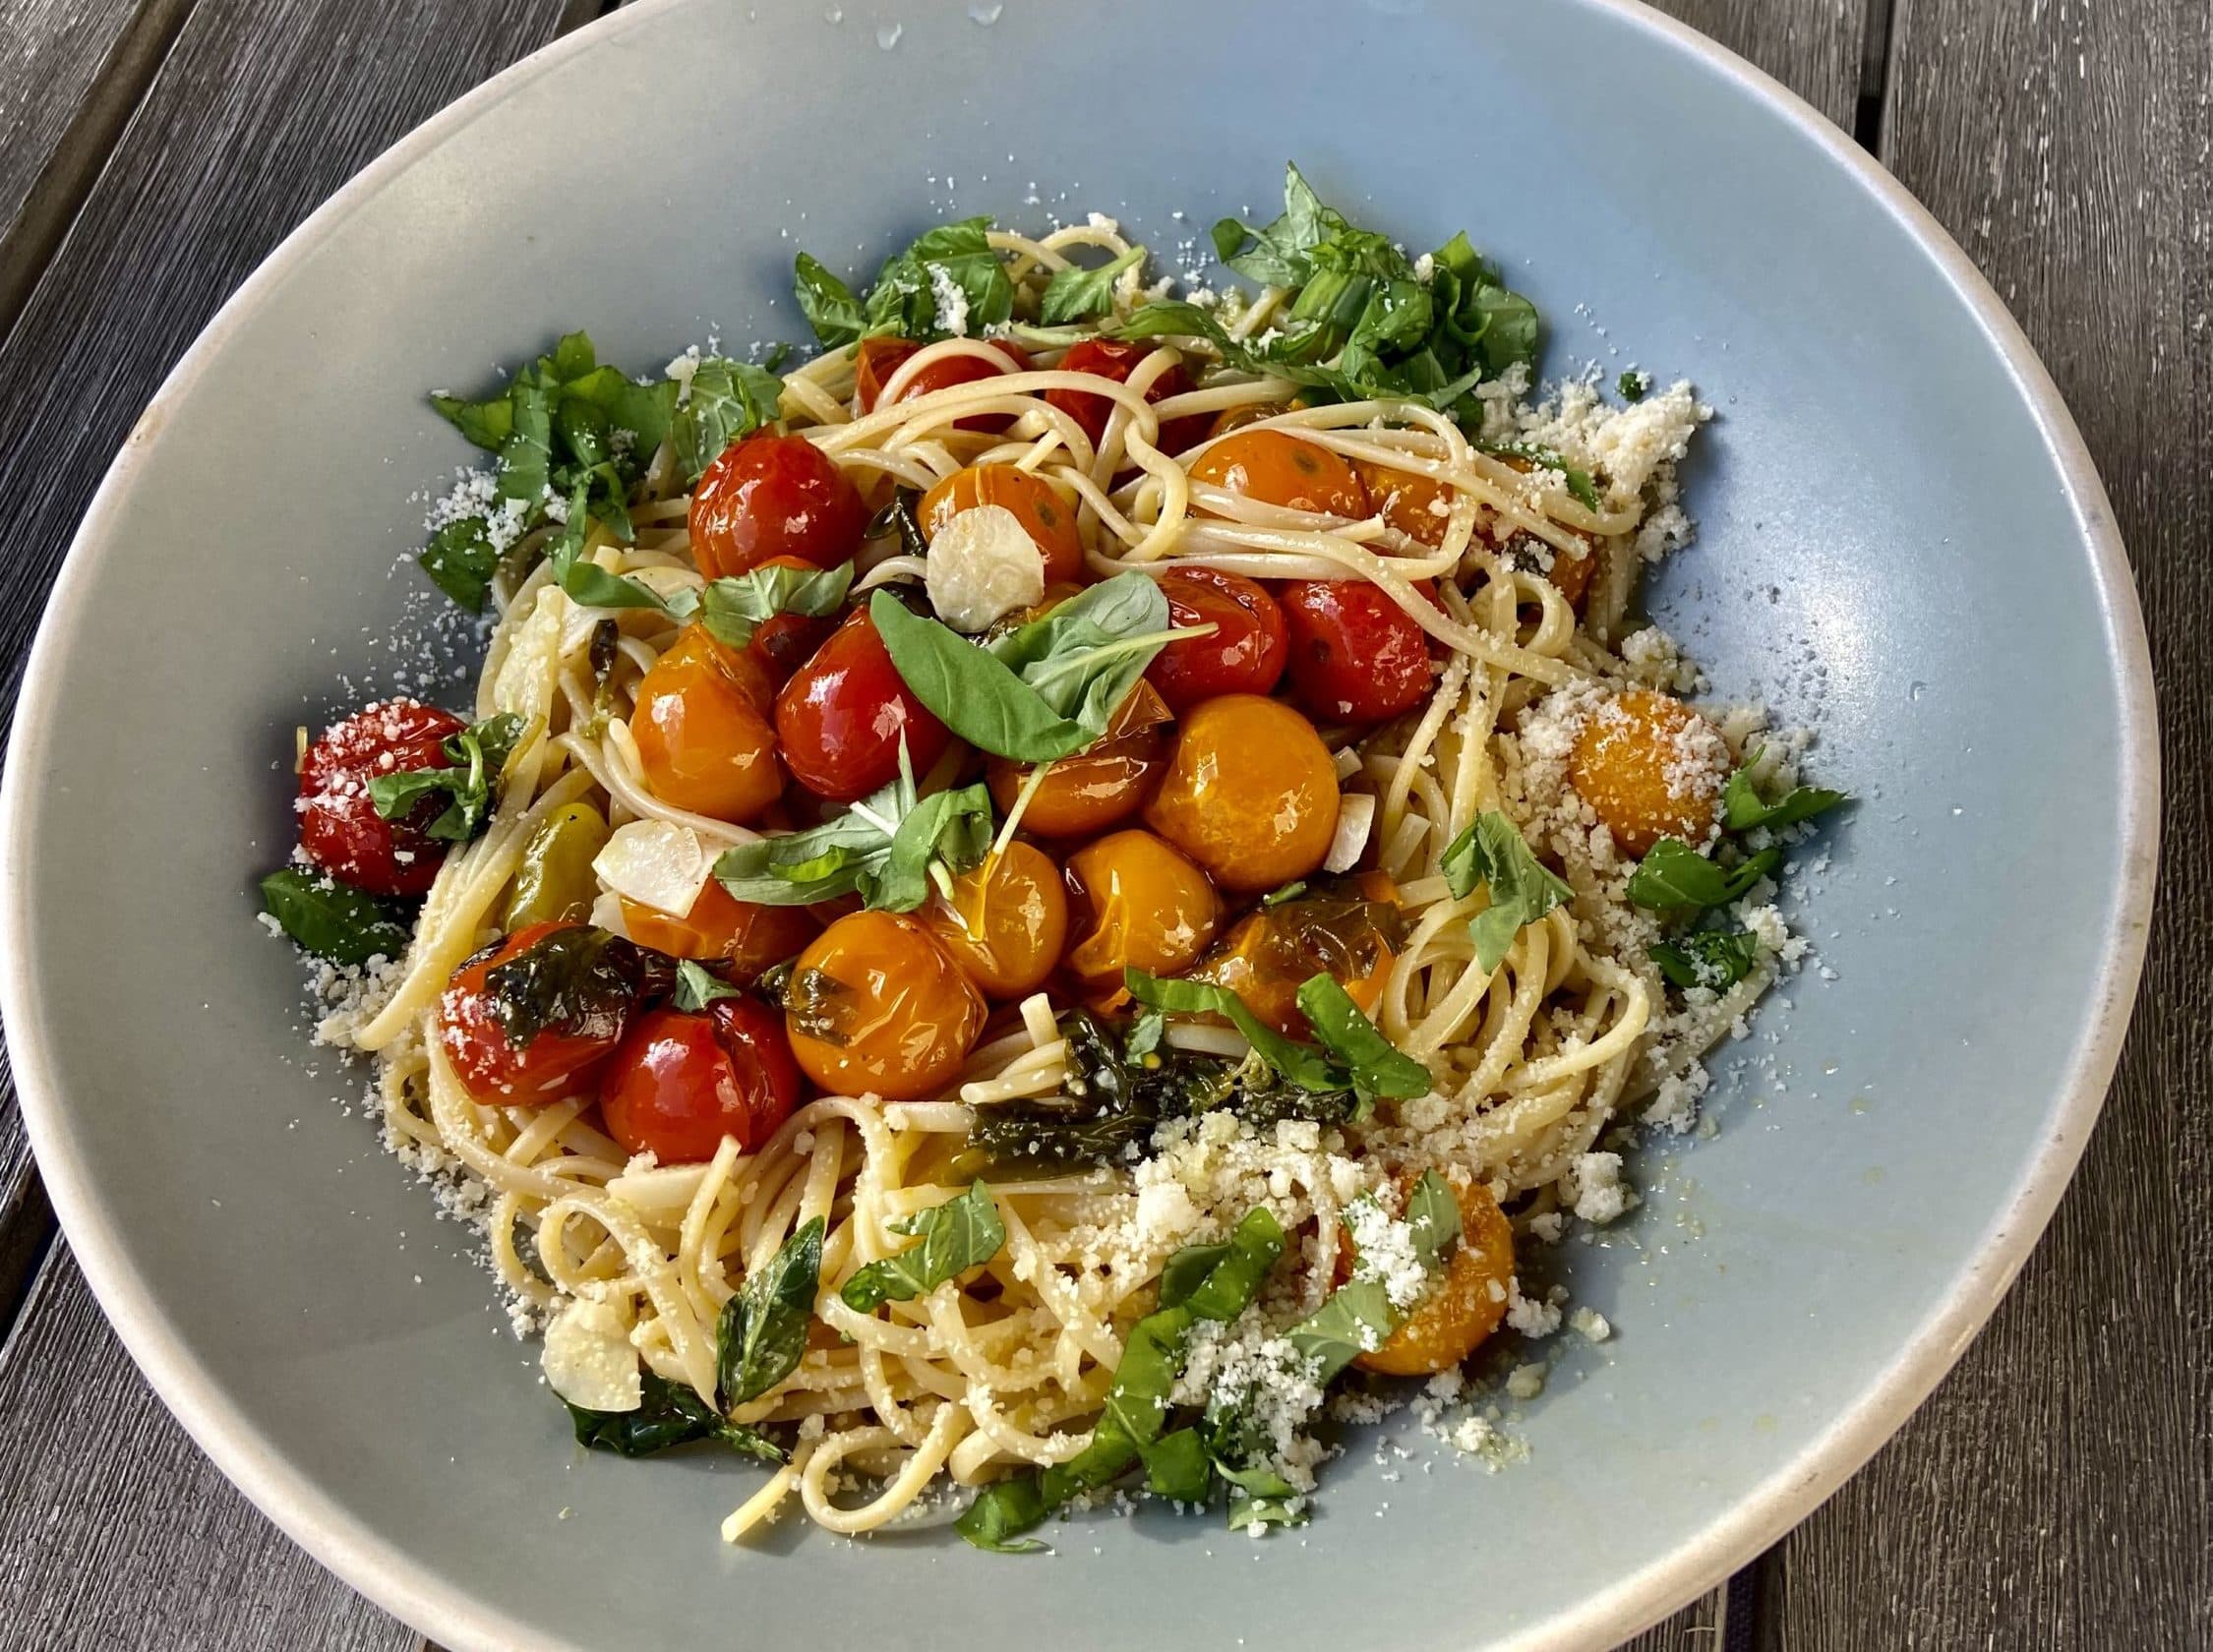 Linguine with cherry tomato confit, basil, pine nuts and arugula.  (Kathy Favor/Here & Now)